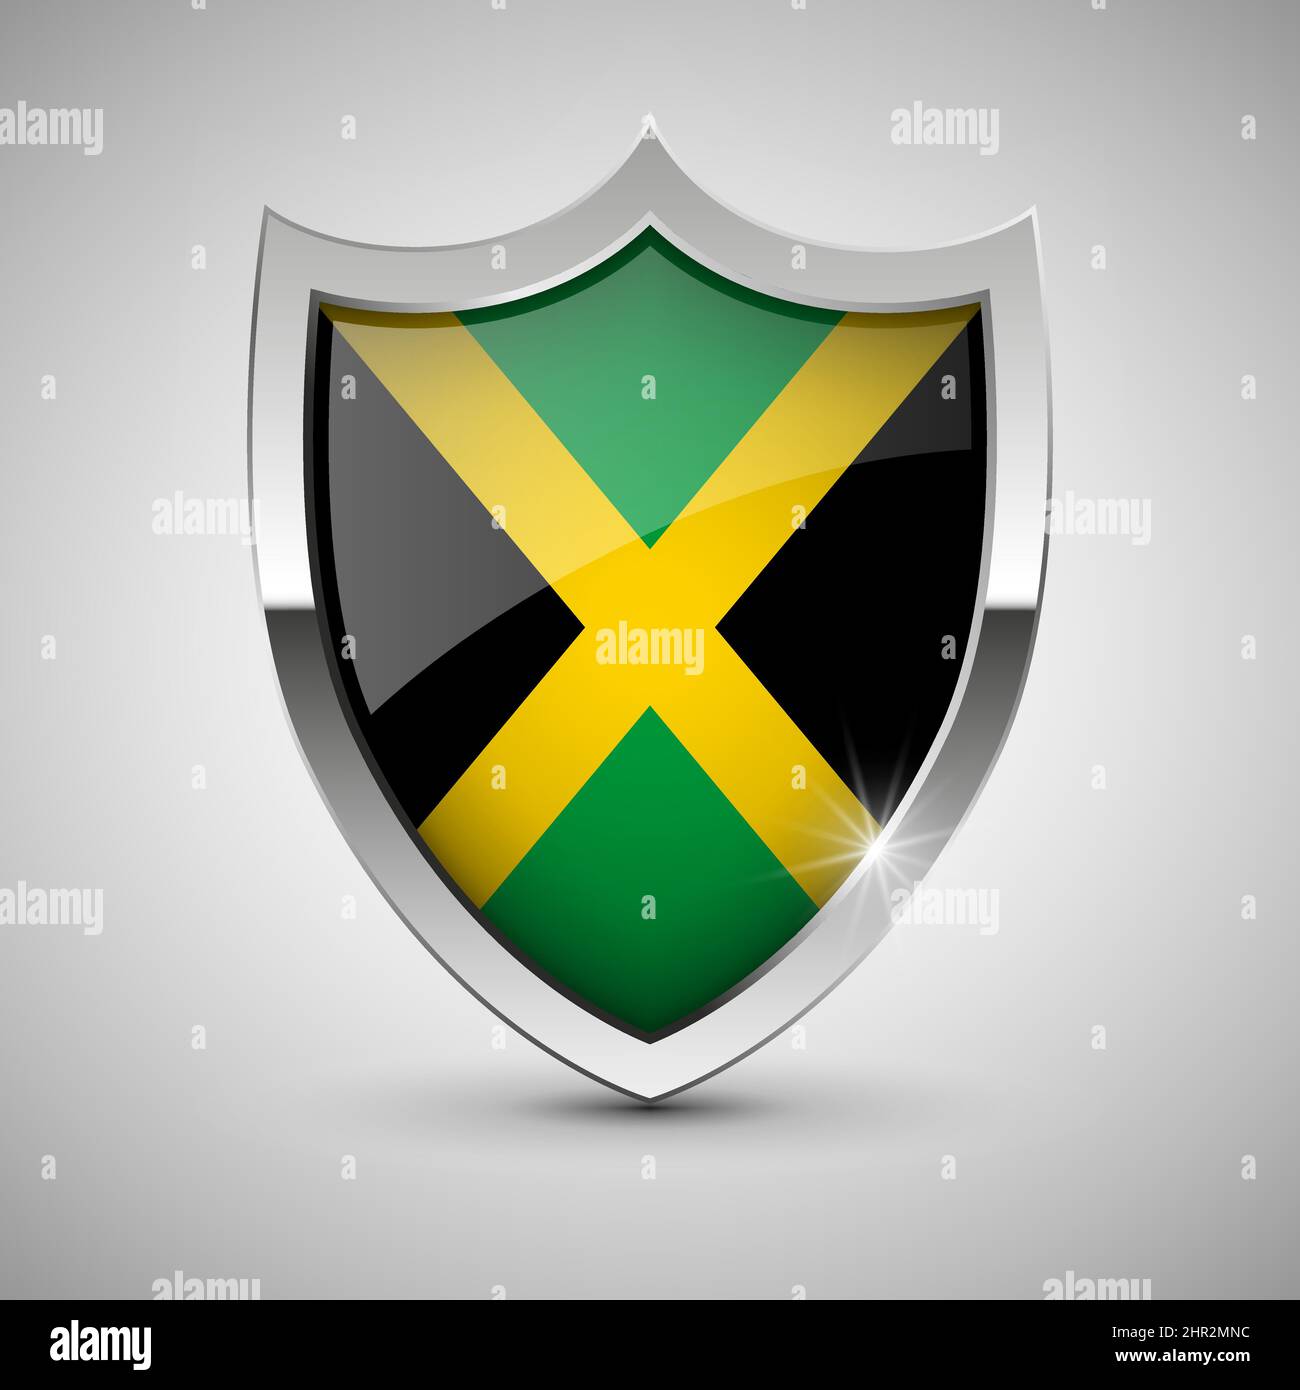 EPS10 Vector Patriotic shield with flag of Jamaica. An element of impact for the use you want to make of it. Stock Vector